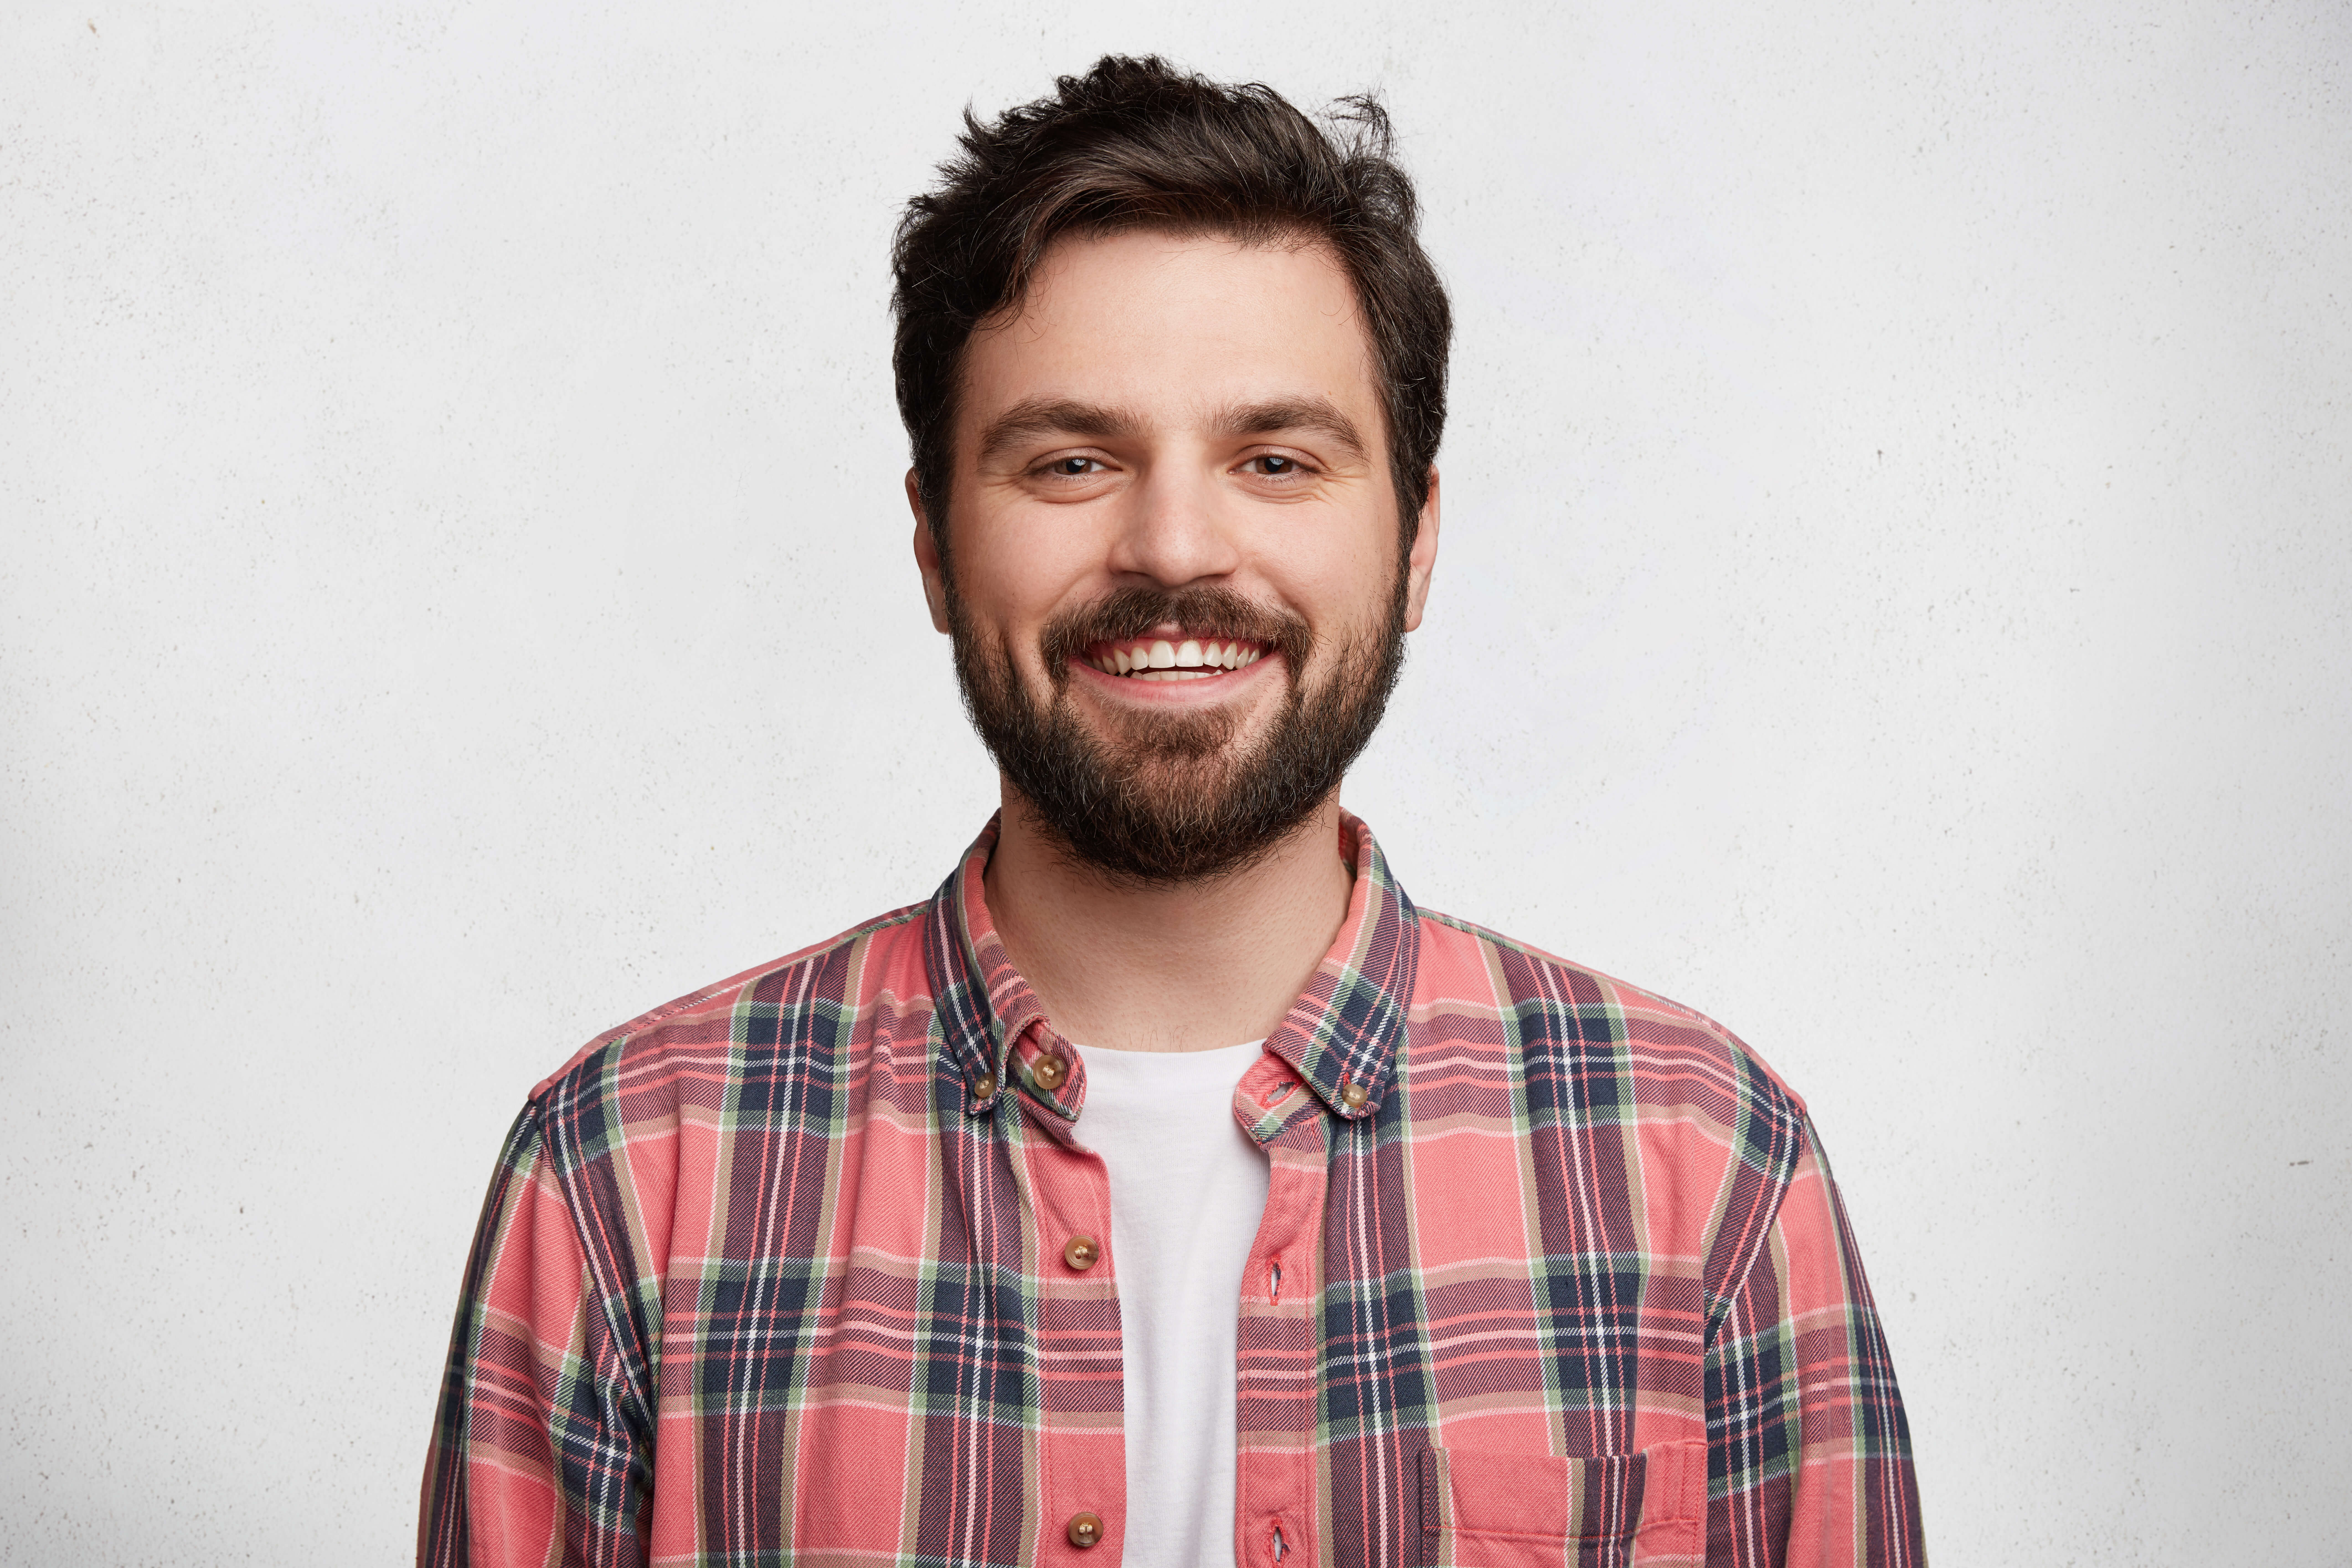 young-bearded-man-with-striped-shirt.jpg